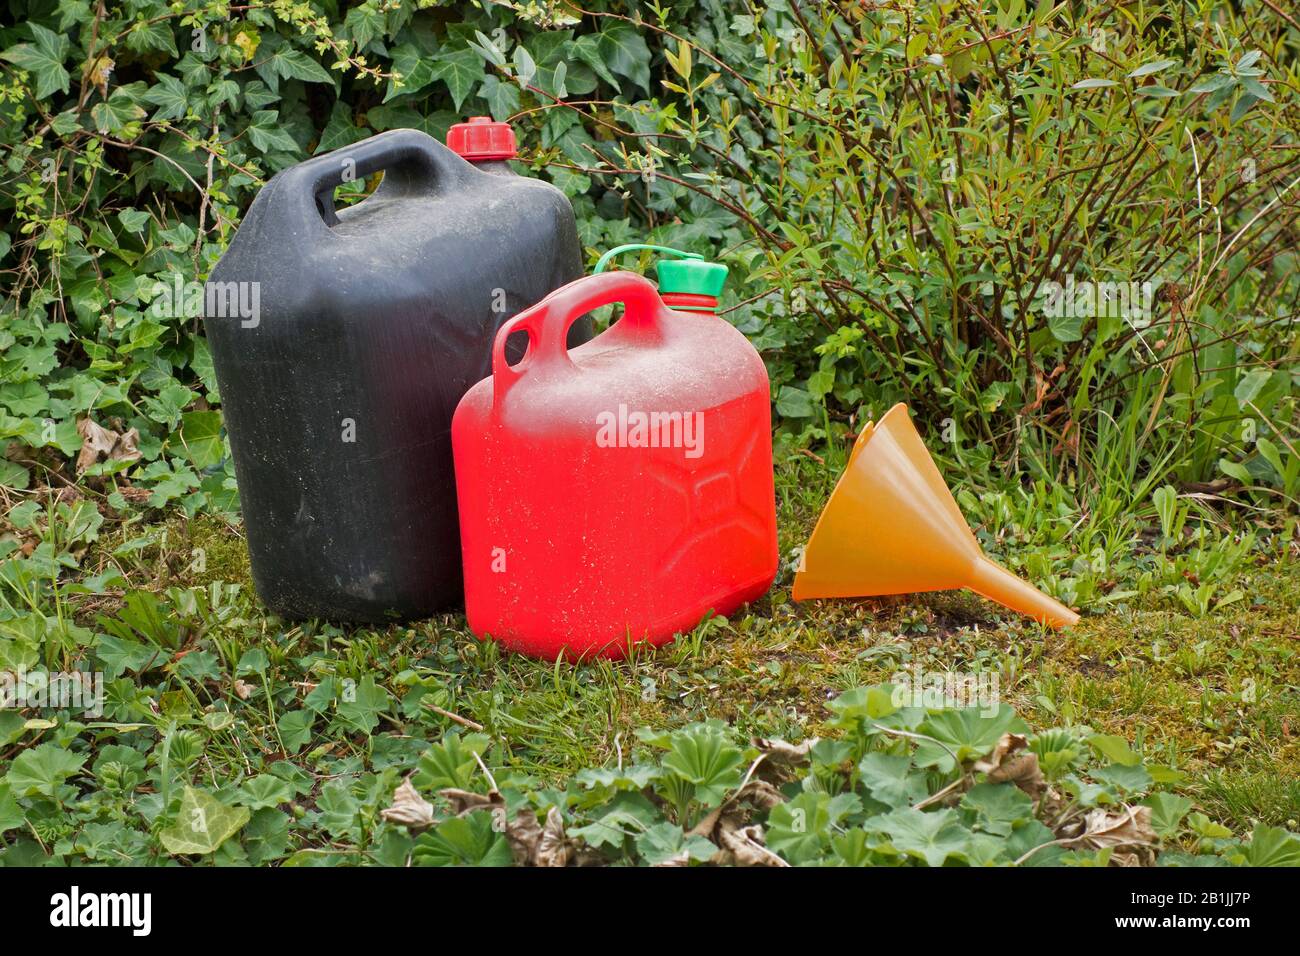 Download Jerry Cans High Resolution Stock Photography And Images Alamy Yellowimages Mockups